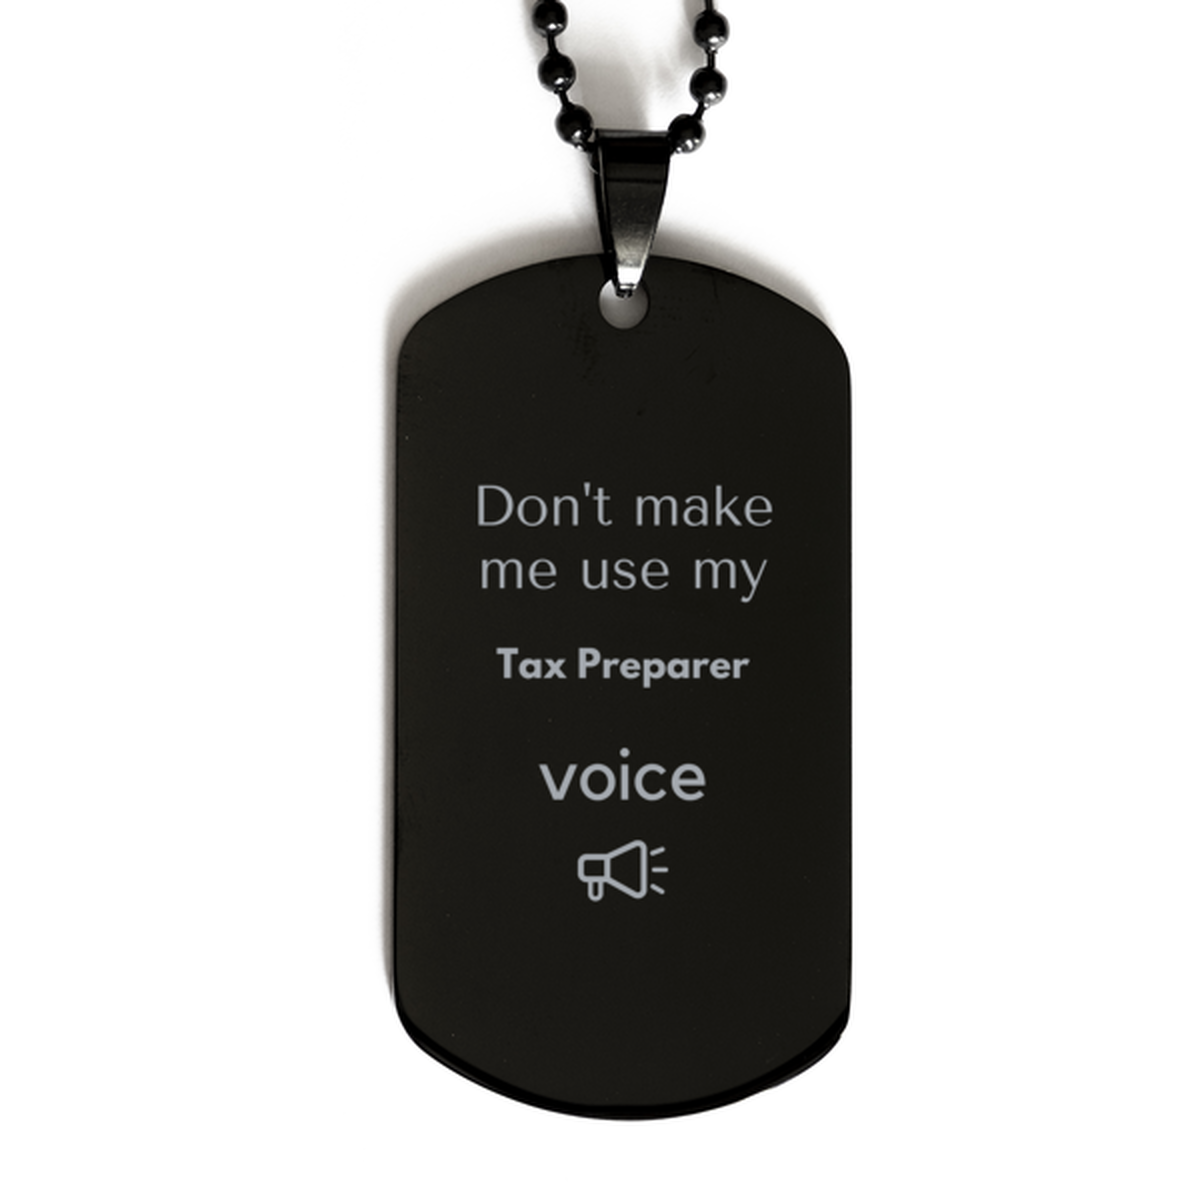 Don't make me use my Tax Preparer voice, Sarcasm Tax Preparer Gifts, Christmas Tax Preparer Black Dog Tag Birthday Unique Gifts For Tax Preparer Coworkers, Men, Women, Colleague, Friends